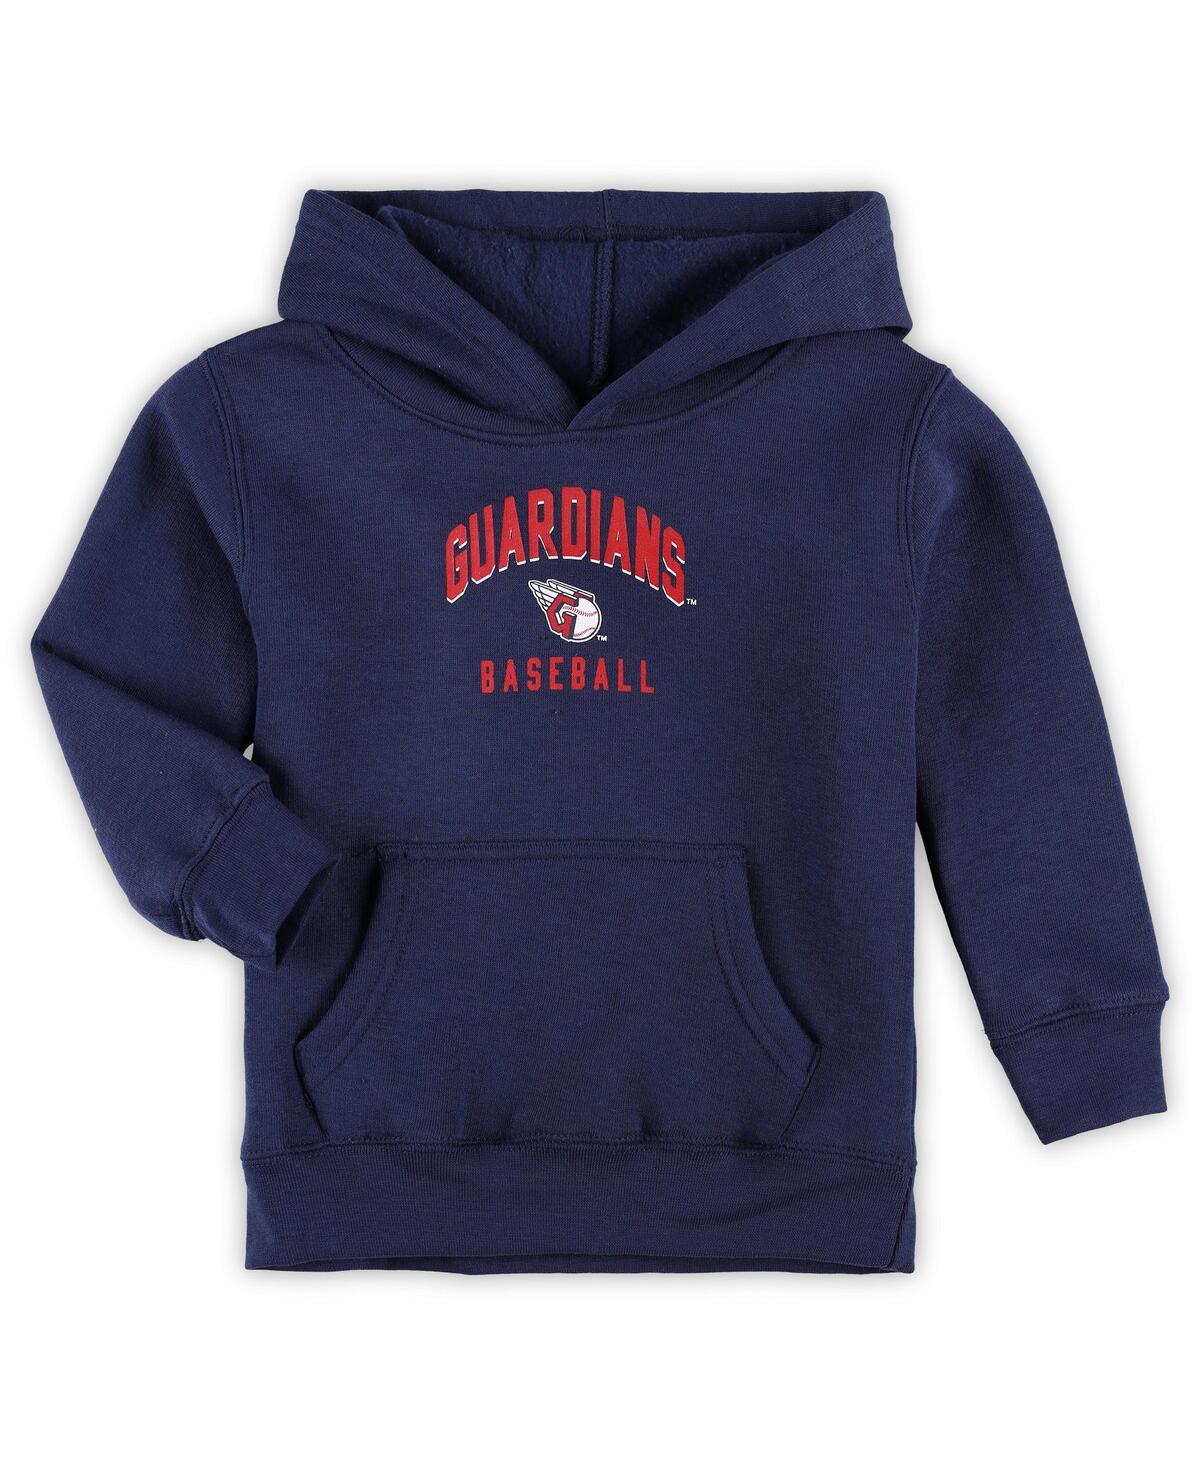 Shop Outerstuff Toddler Boys And Girls Navy, Gray Cleveland Guardians Play-by-play Pullover Fleece Hoodie And Pants  In Navy,gray